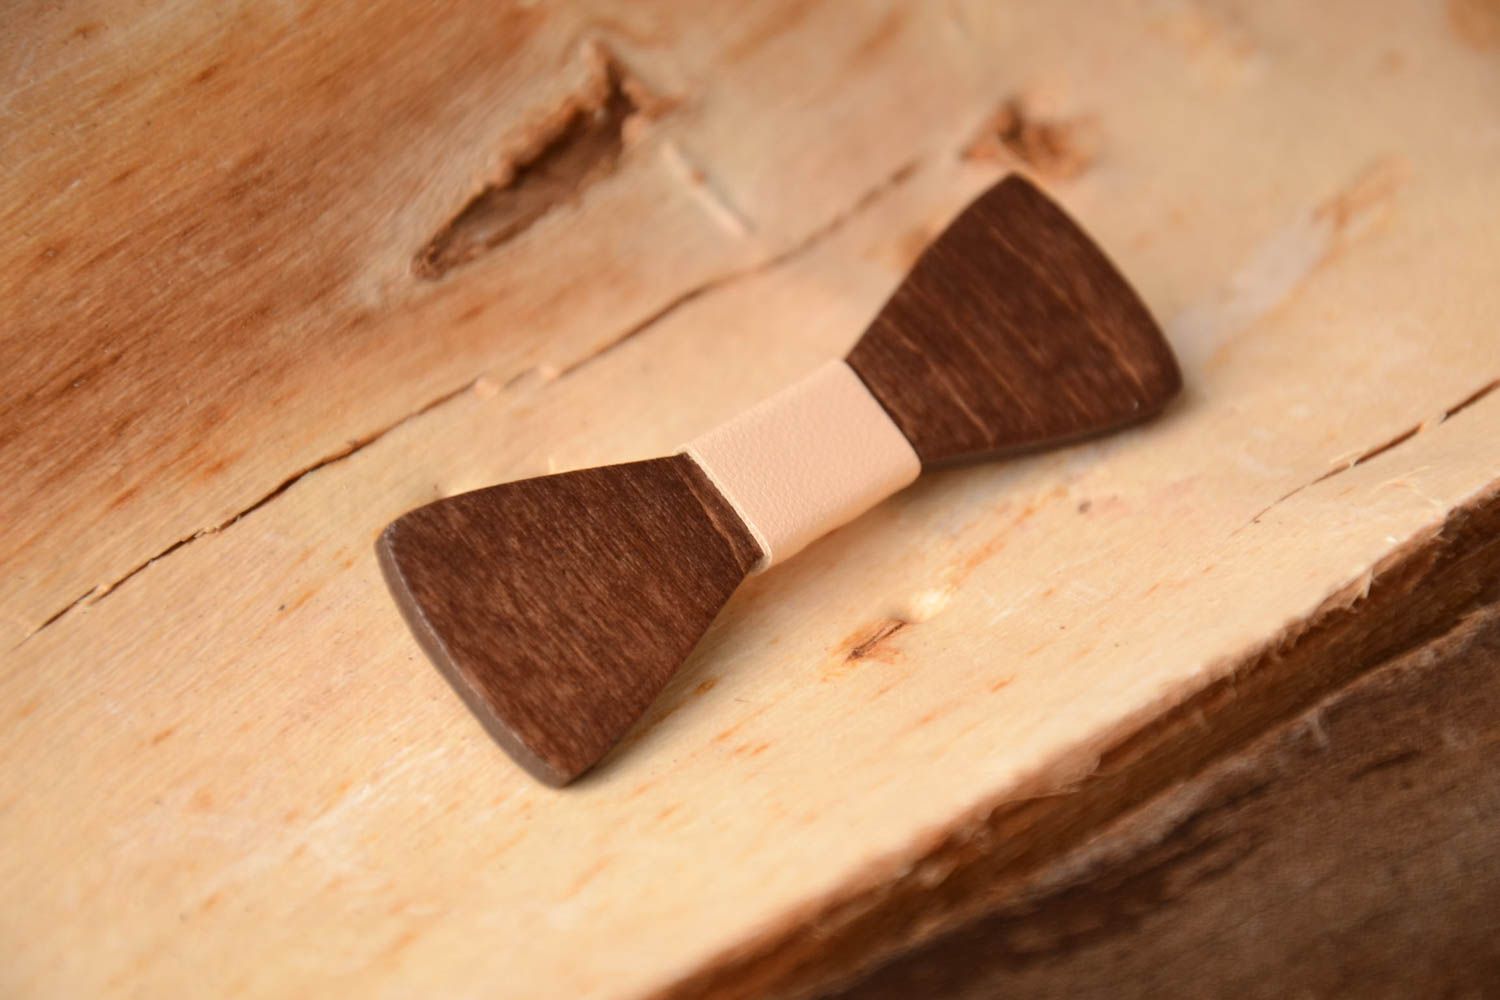 Handmade wooden bow tie designer female accessory stylish brooch gift for her photo 1